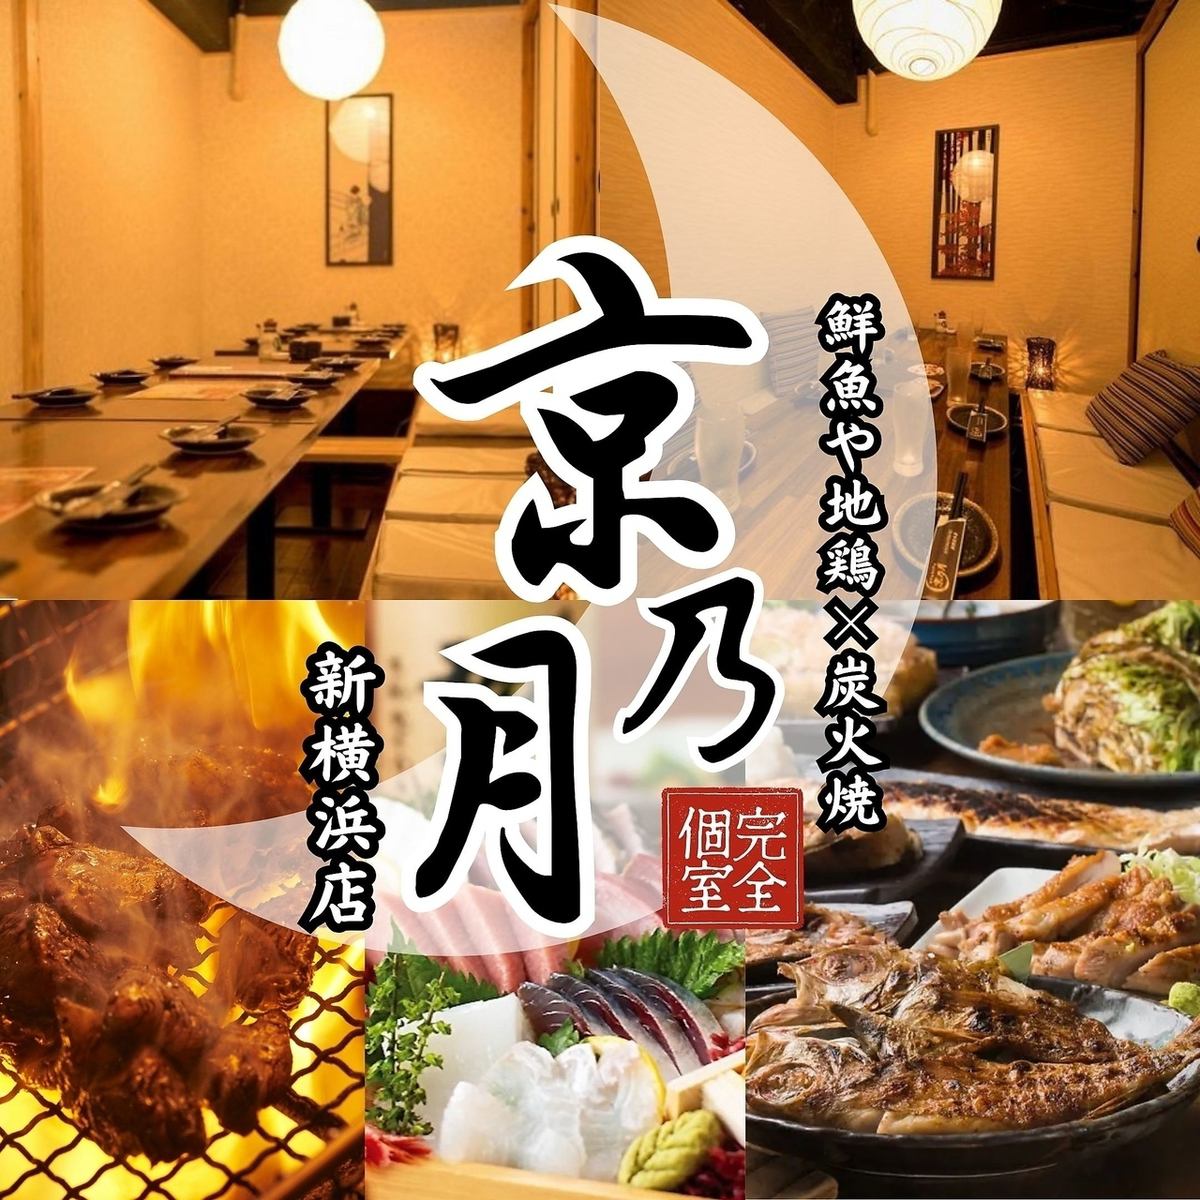 1 minute from JR Shin-Yokohama Station! All-you-can-drink course starts from 3,280 yen! All seats are completely private rooms!